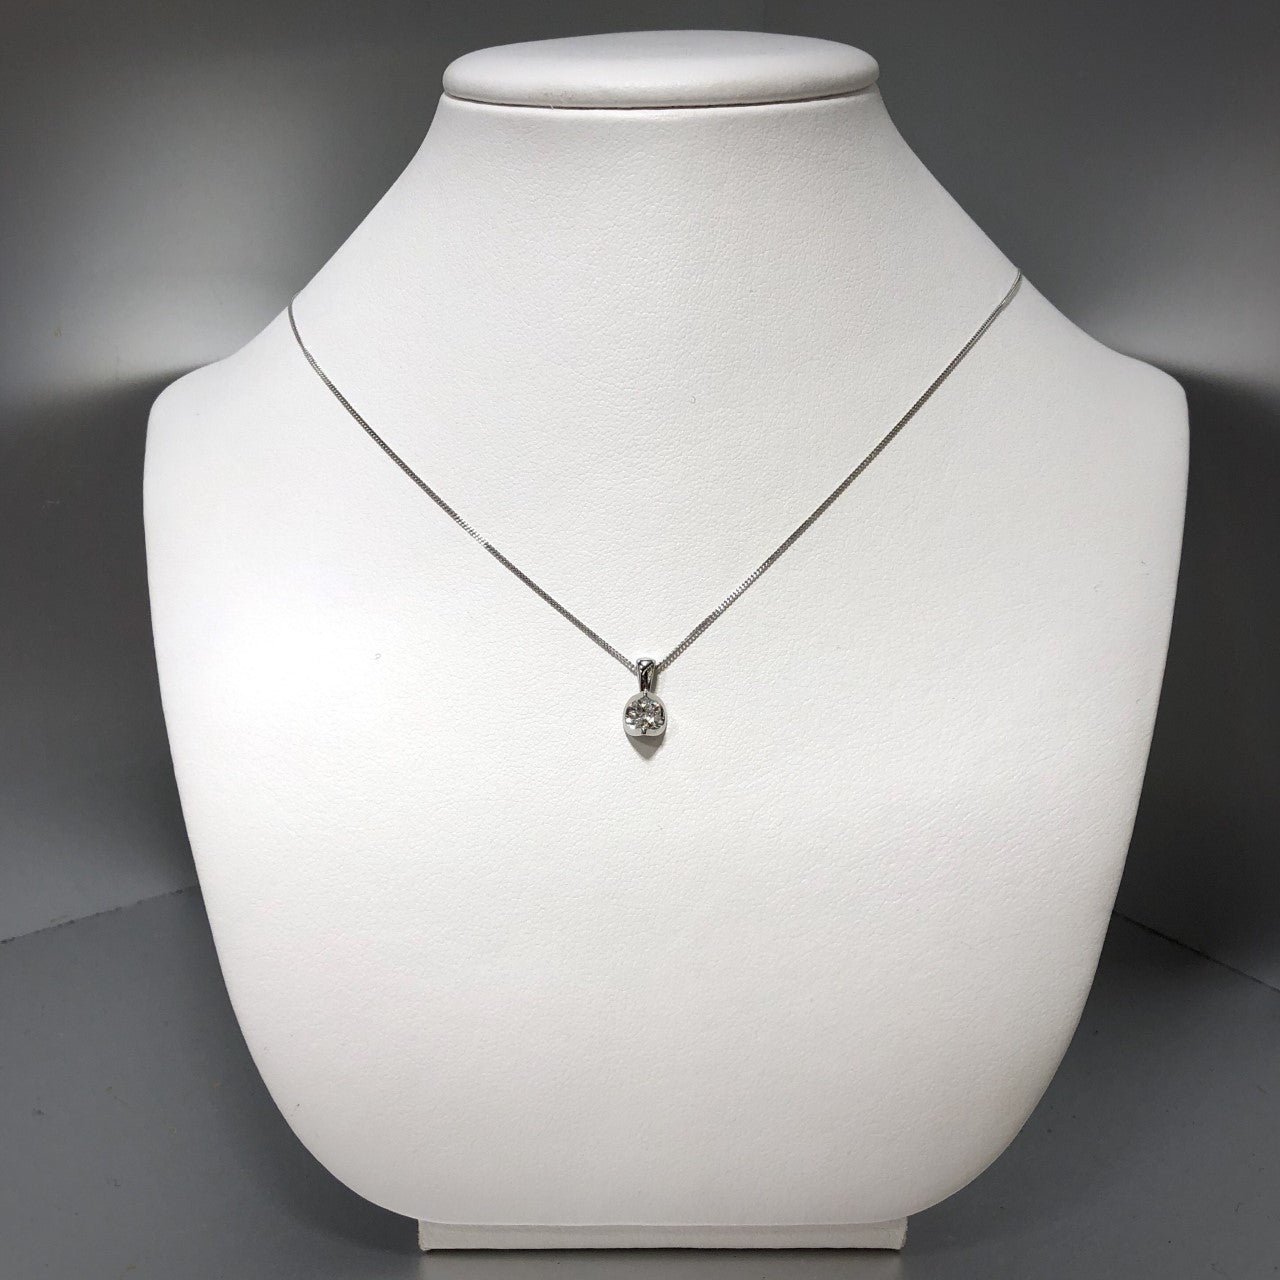 14KW Solitaire Diamond Pendant 0.25ct (Chain Included)